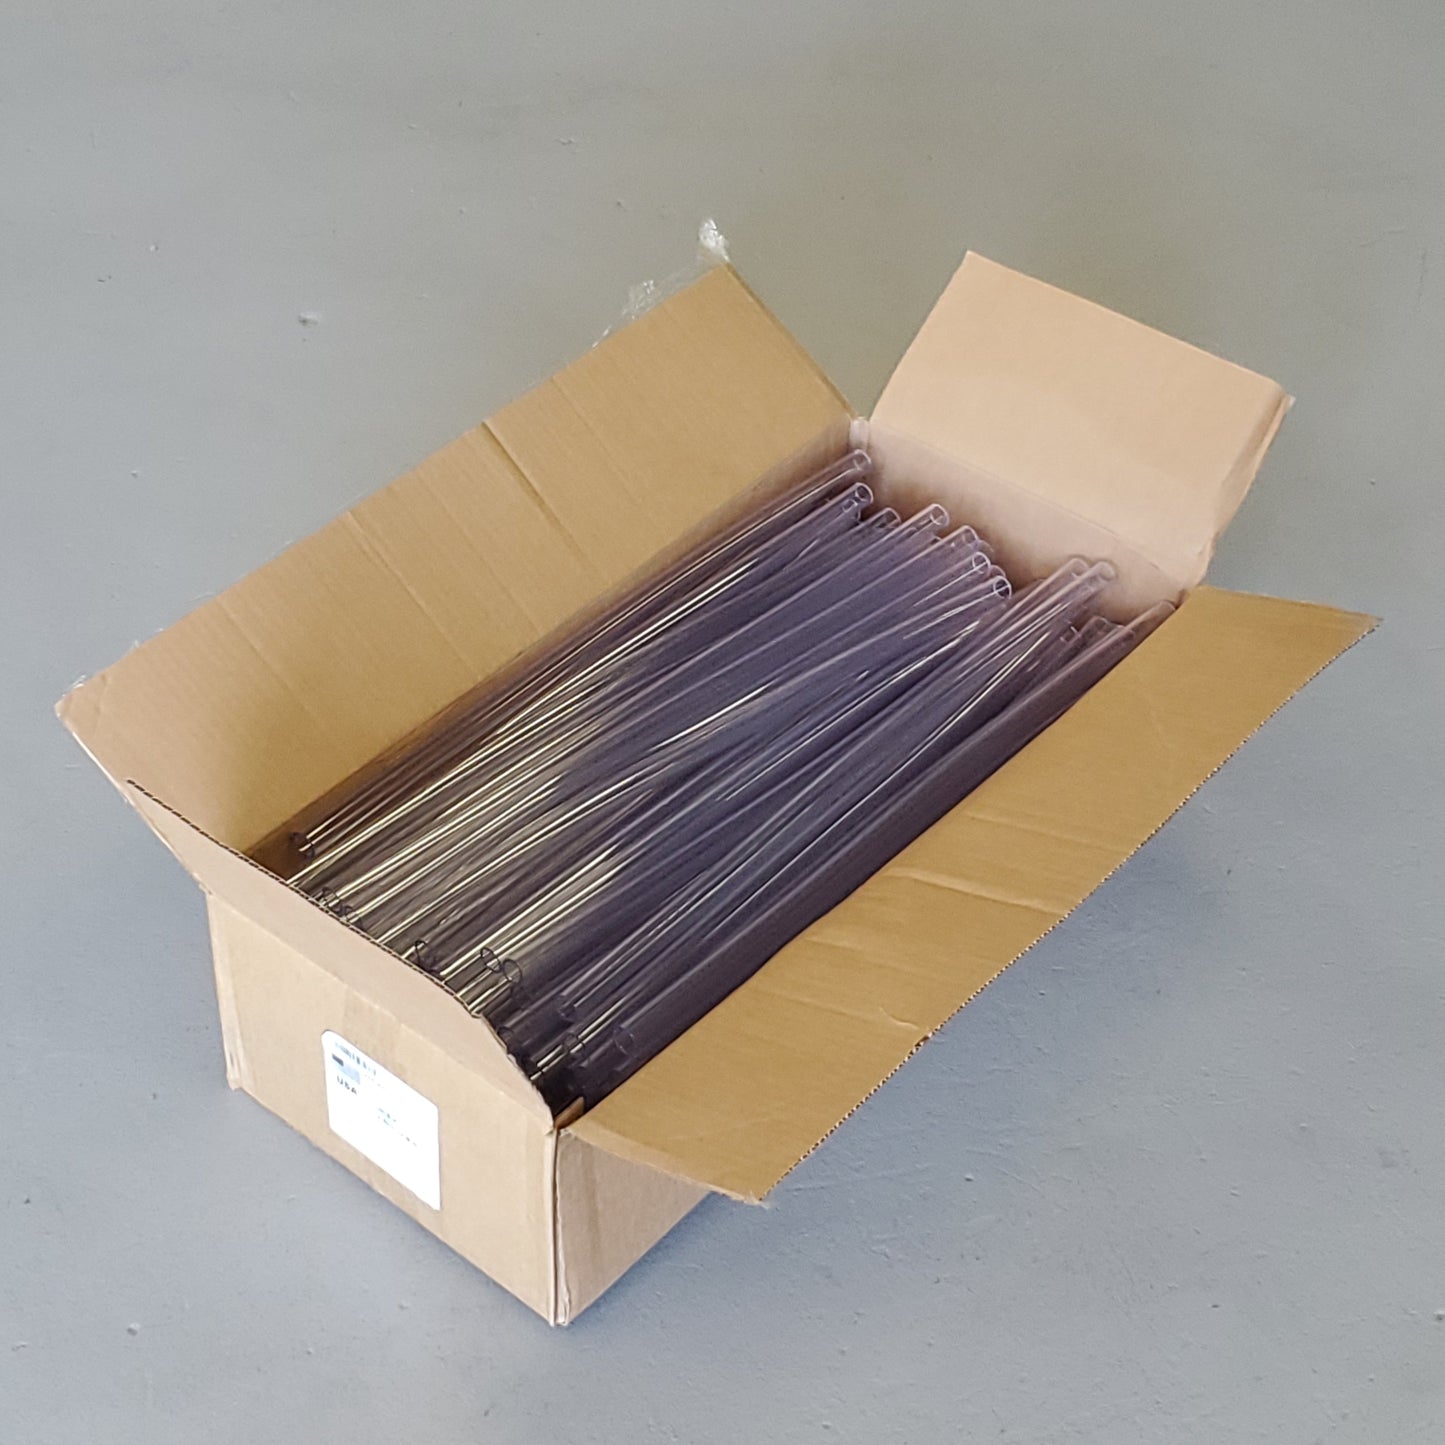 Z@ Case Of 100 PVC Clear Vinyl Tubing / Hoses .625 ID X .812 OD X 24" Long Made In USA (New) B